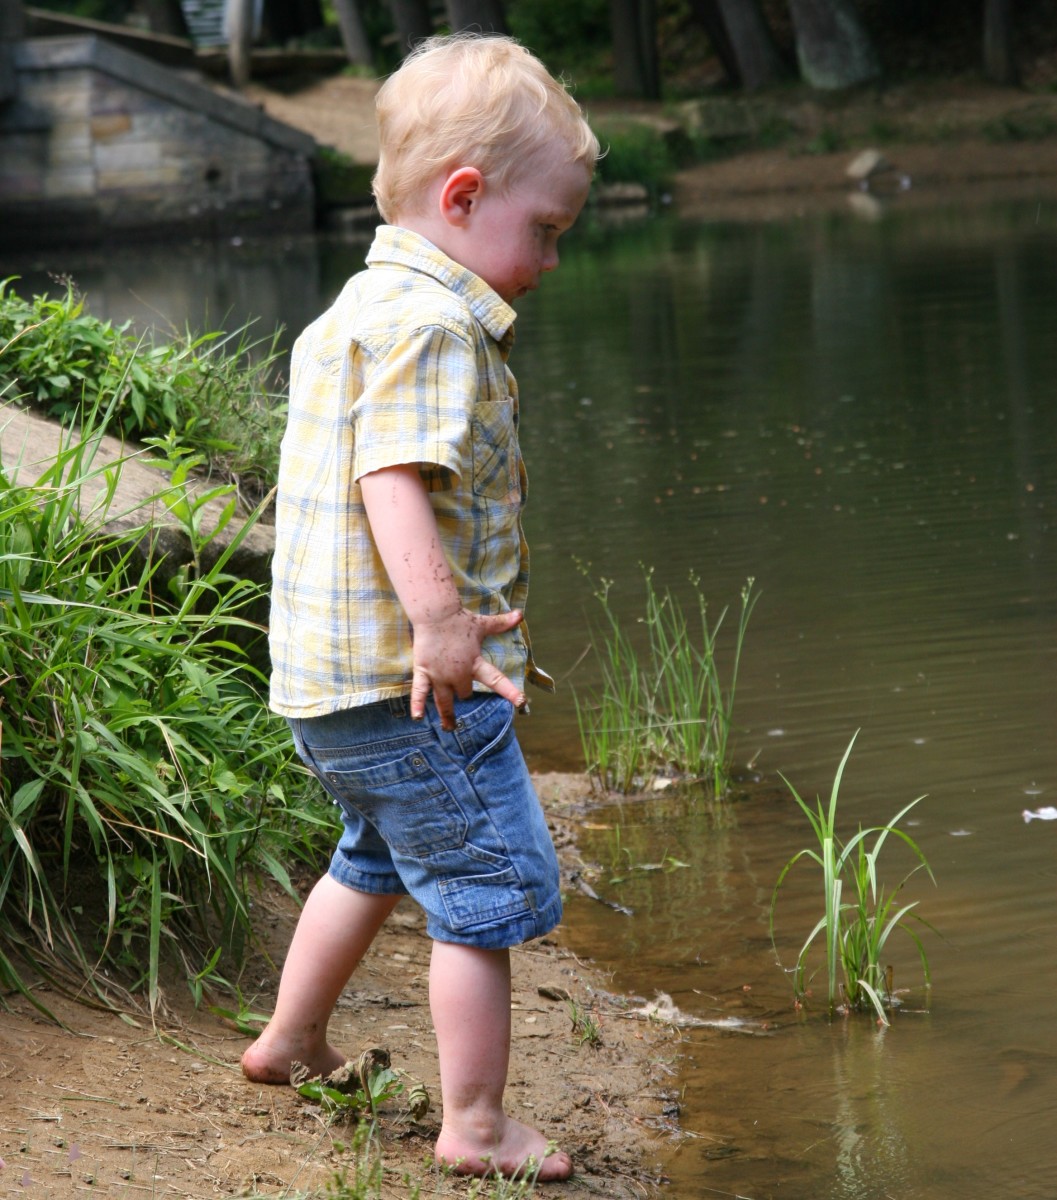 Wading along ponds and other waterways is a muddy business. Water shoes will help protect sensitive small feet from sharp stones and shells.